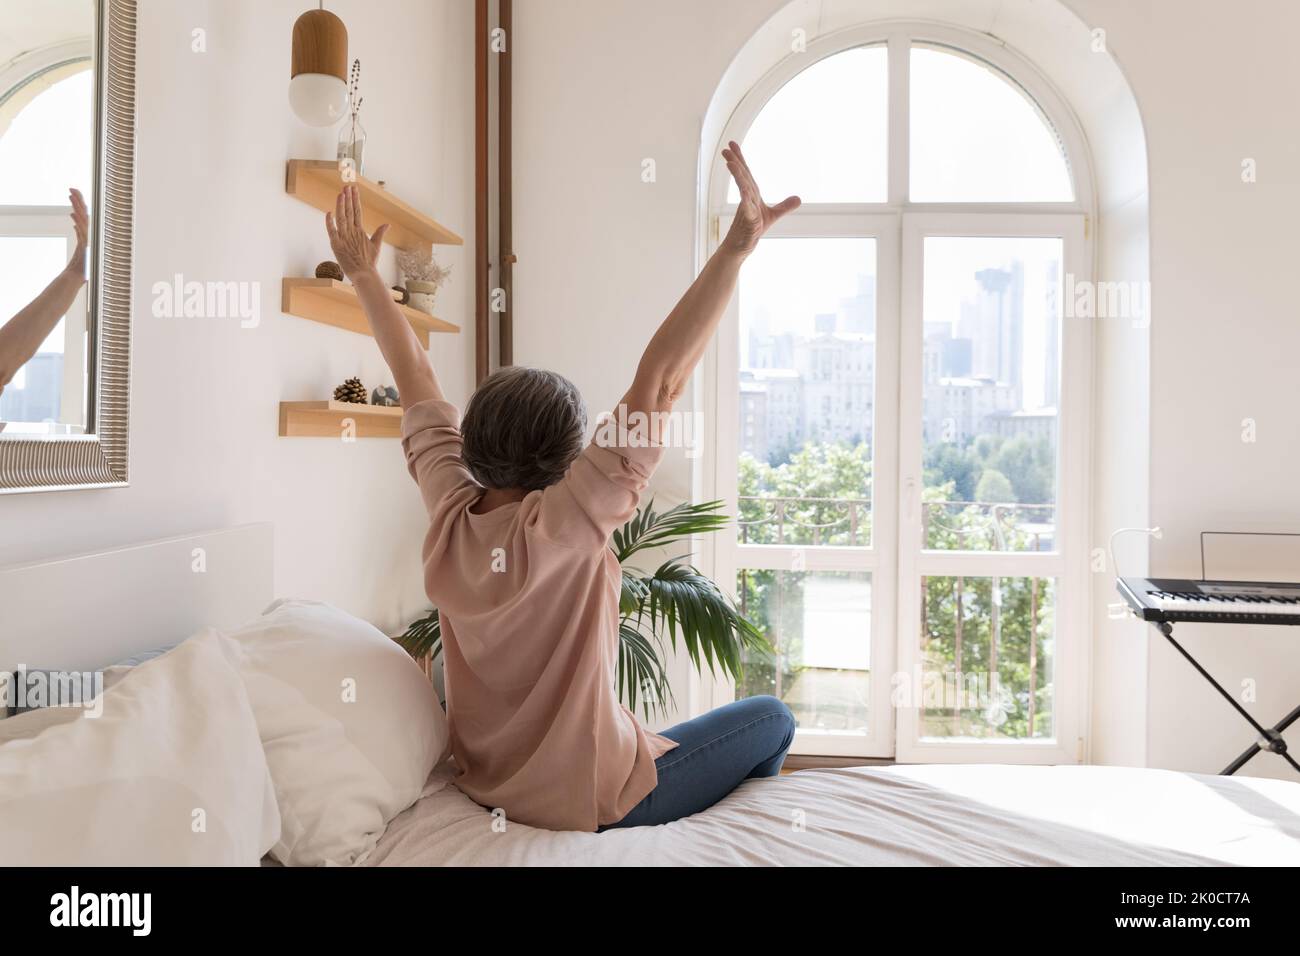 Relaxed older mature woman enjoying being in cozy home bedroom Stock Photo